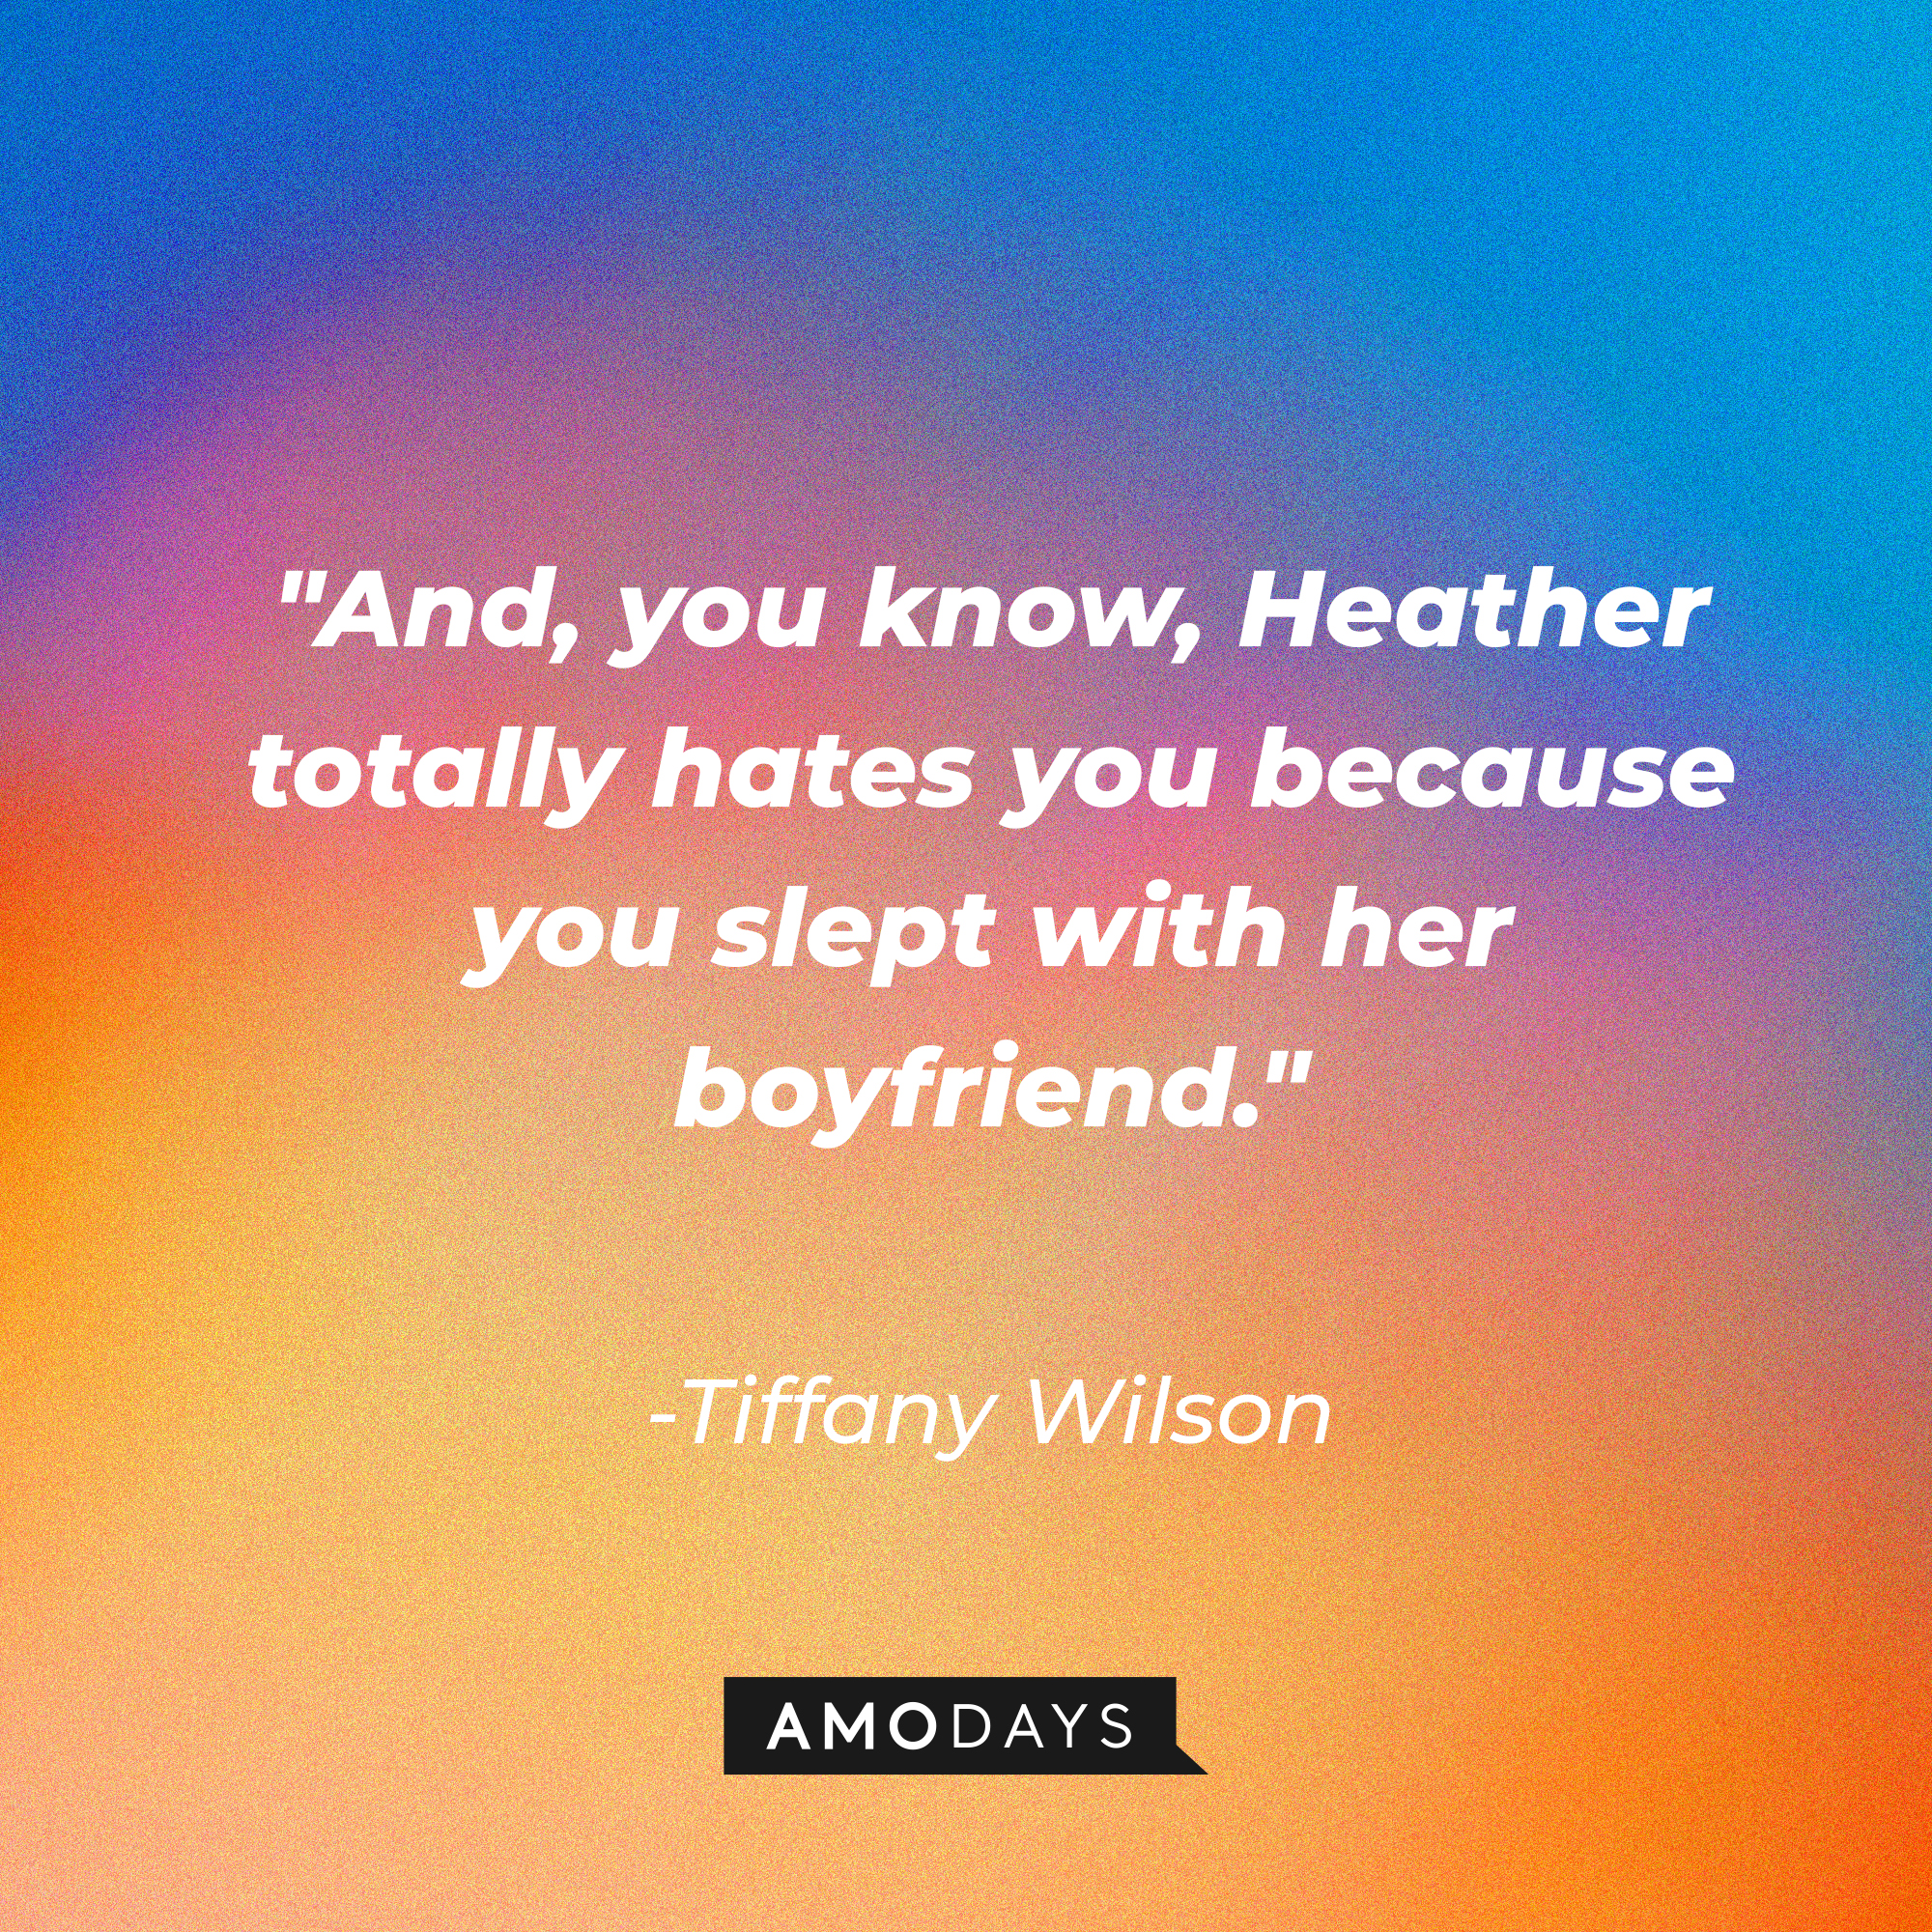 Tiffany Wilson's quote: "And, you know, Heather totally hates you because you slept with her boyfriend." | Source: Amodays